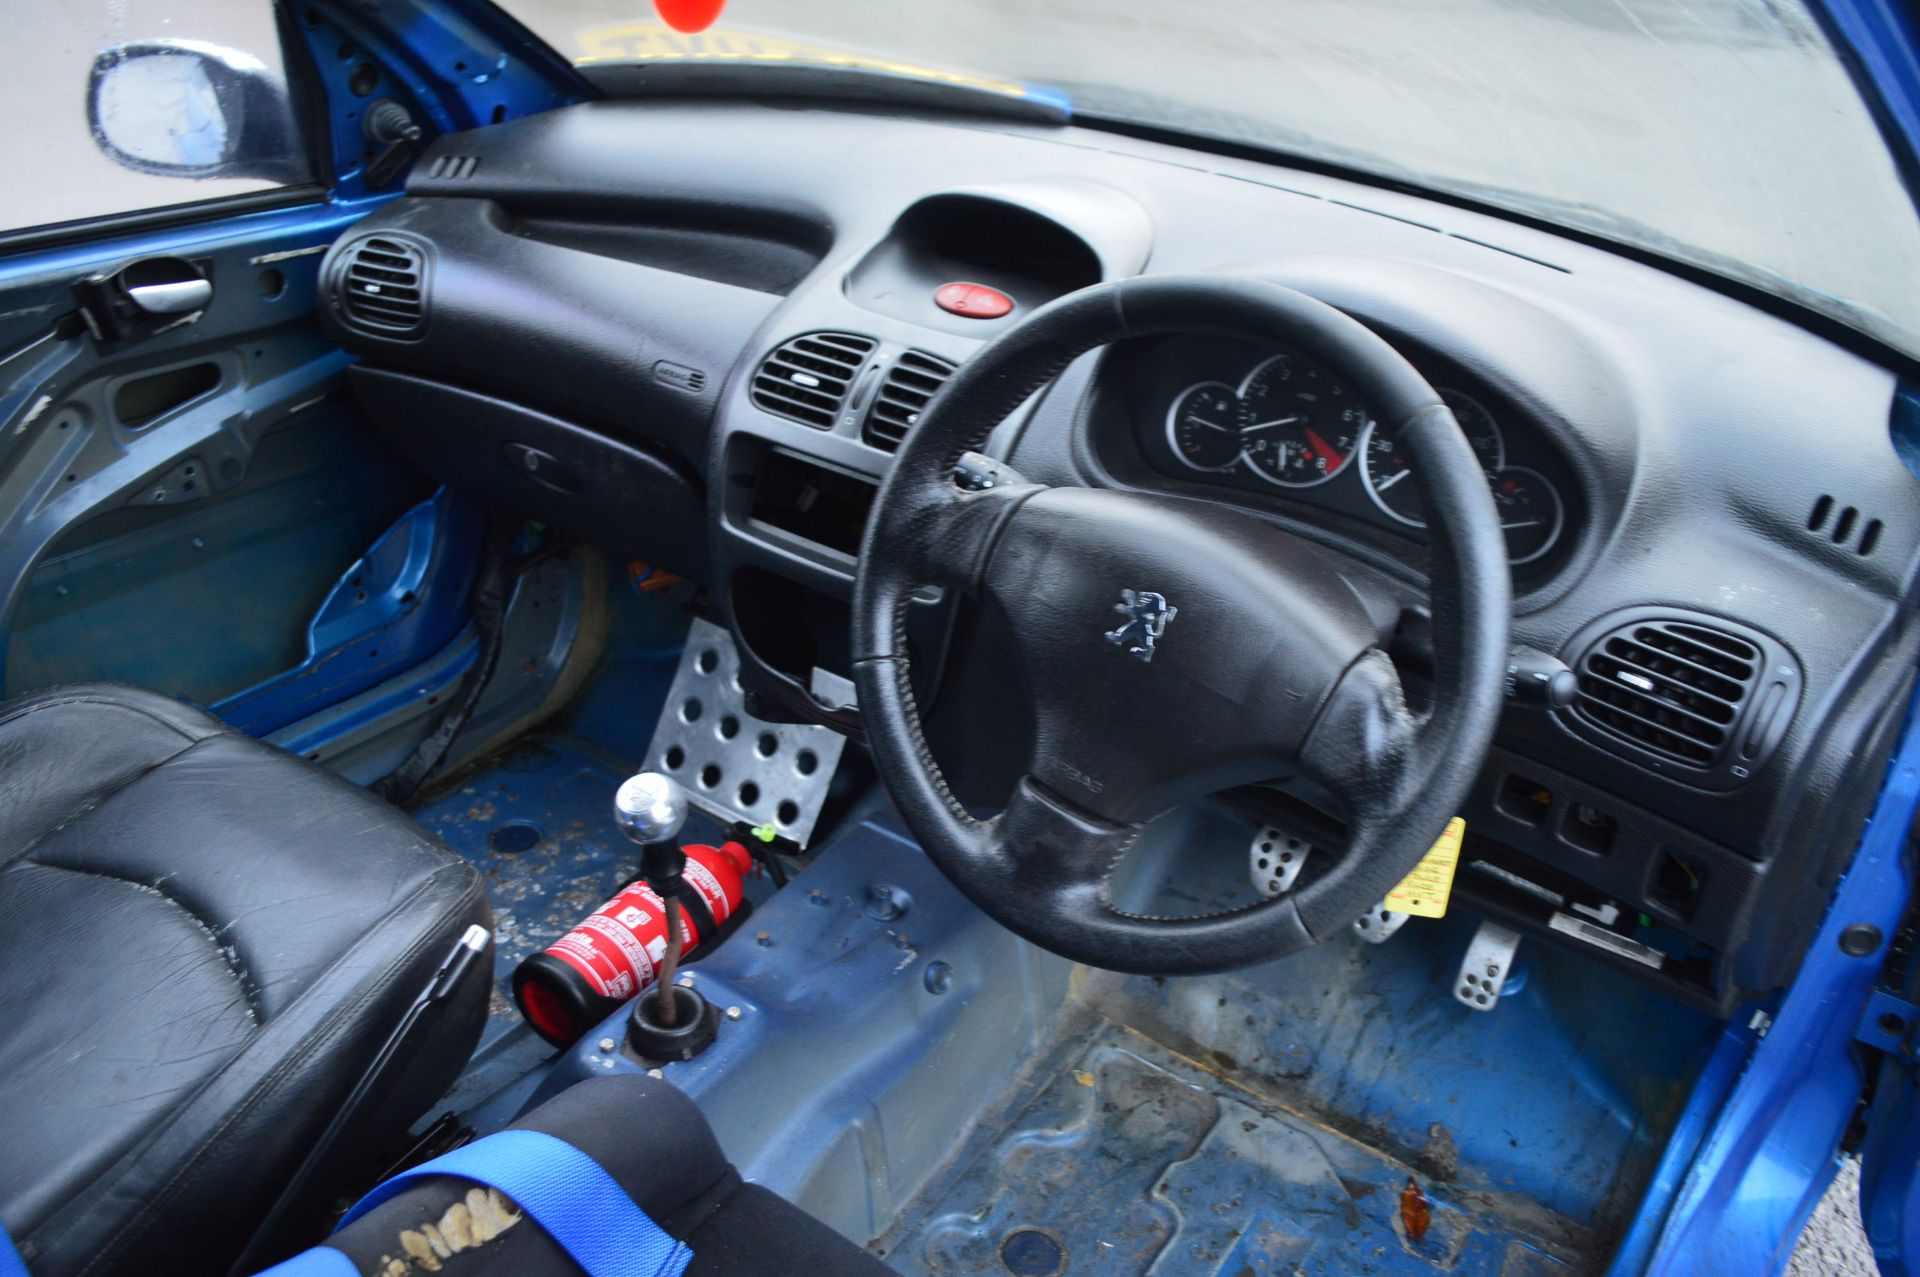 2003/03 REG PEUGEOT 206 GTI 180HP FAST TRACK DAY CAR  HAS THE 'VAN' PANELS FITTED INSTEAD OF REAR - Image 13 of 14